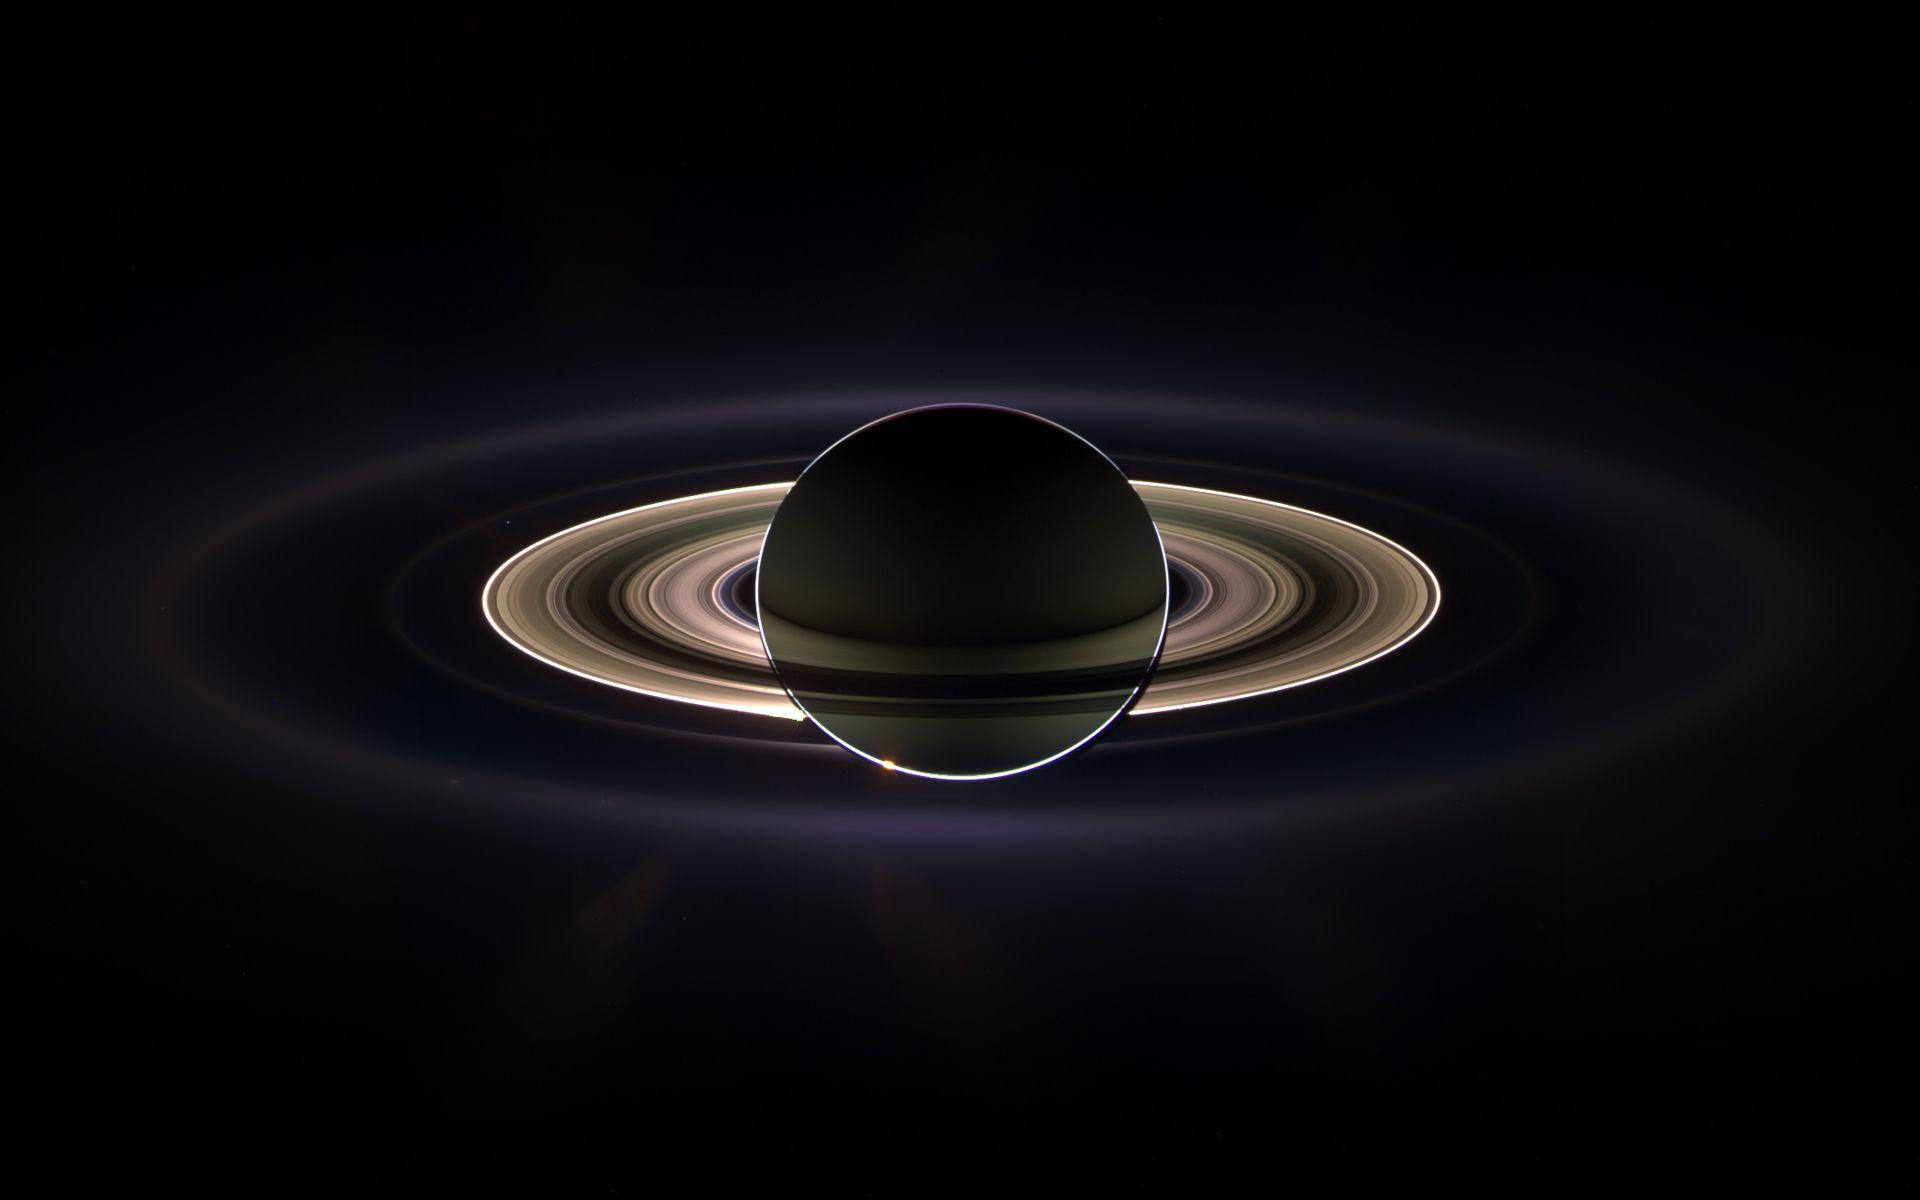 Saturn Planet Wallpapers Top Free Saturn Planet Backgrounds Wallpaperaccess 2235